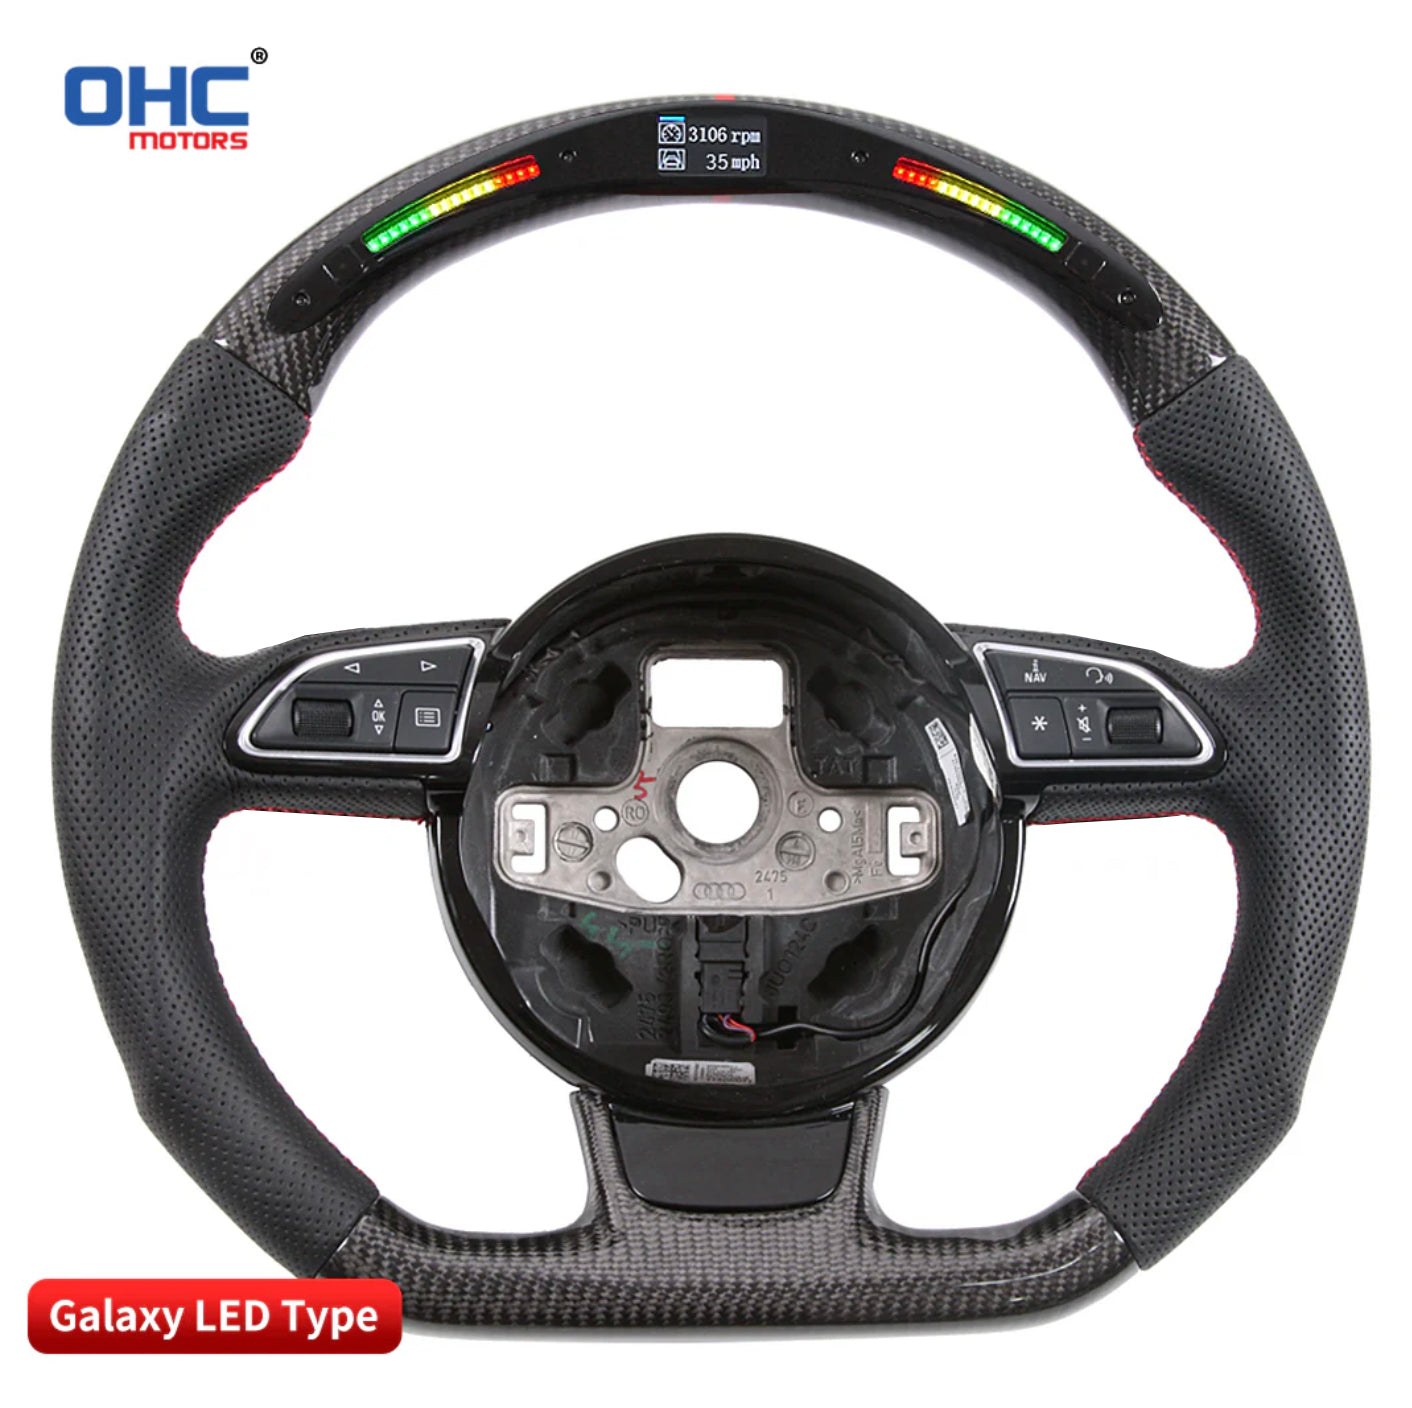 Audi A1 & S1 Carbon Fibre & Galaxy LED Steering Wheel by OHC (2014-2018)